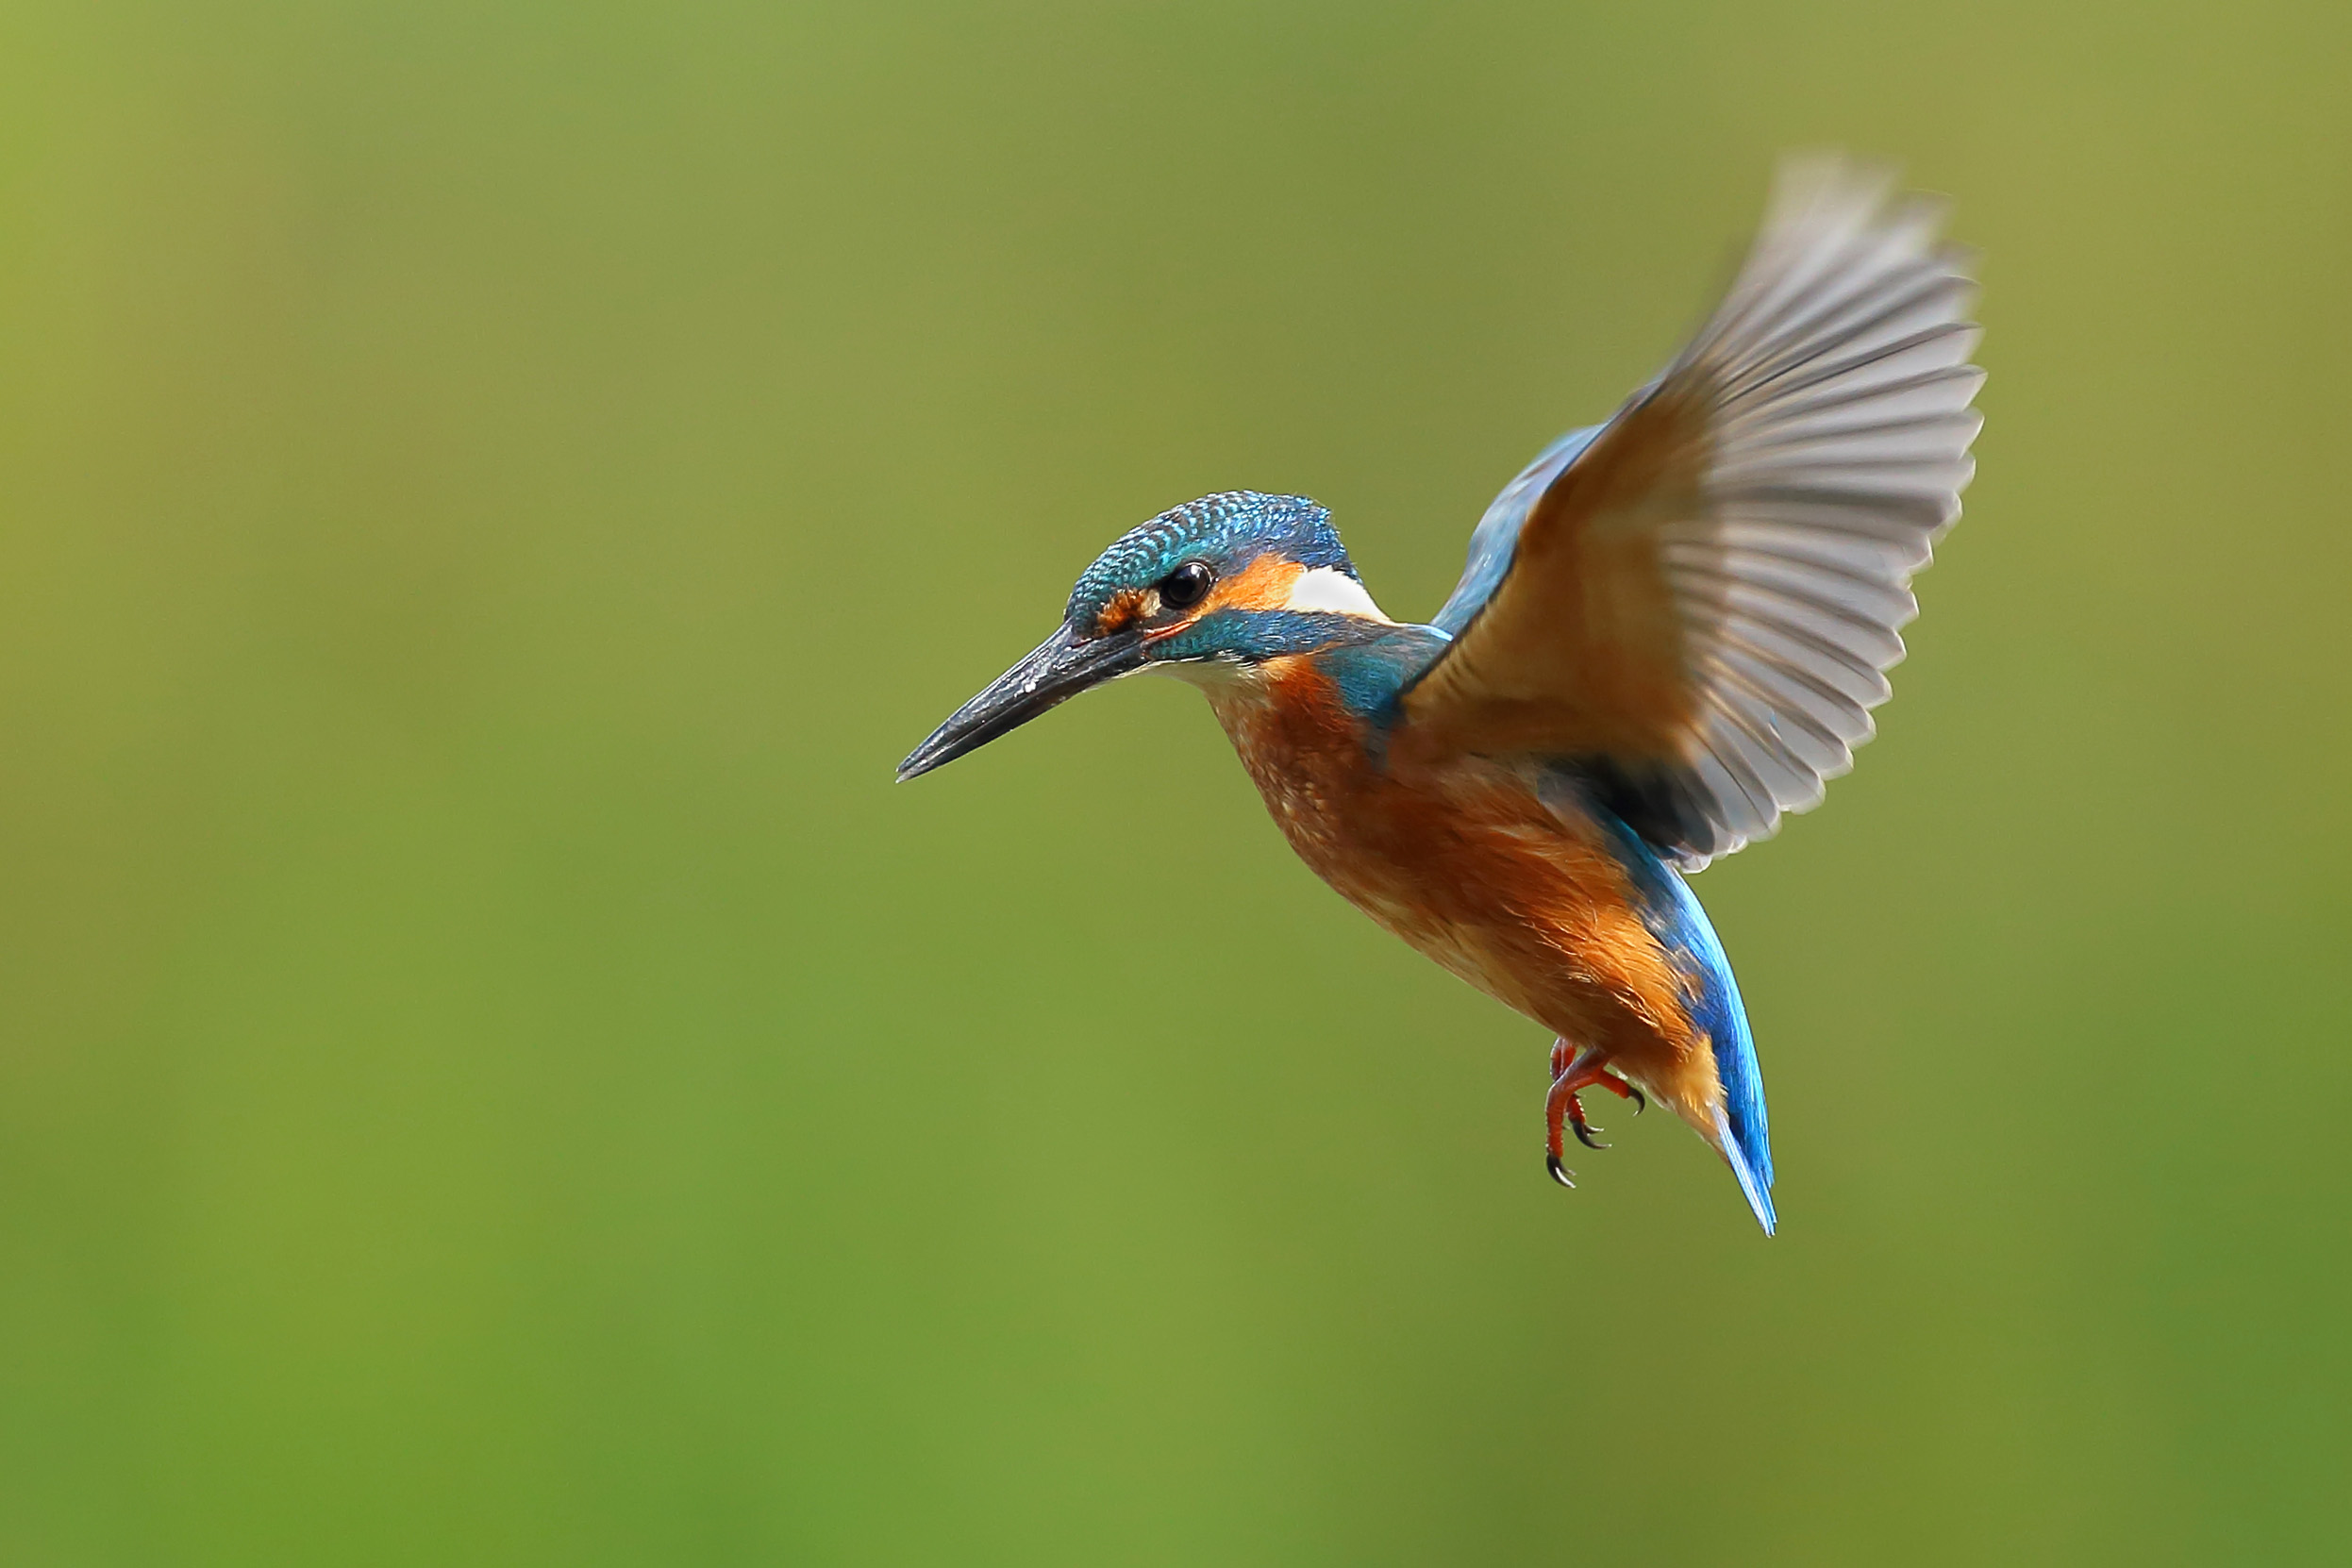 A Kingfisher hovering in flight.